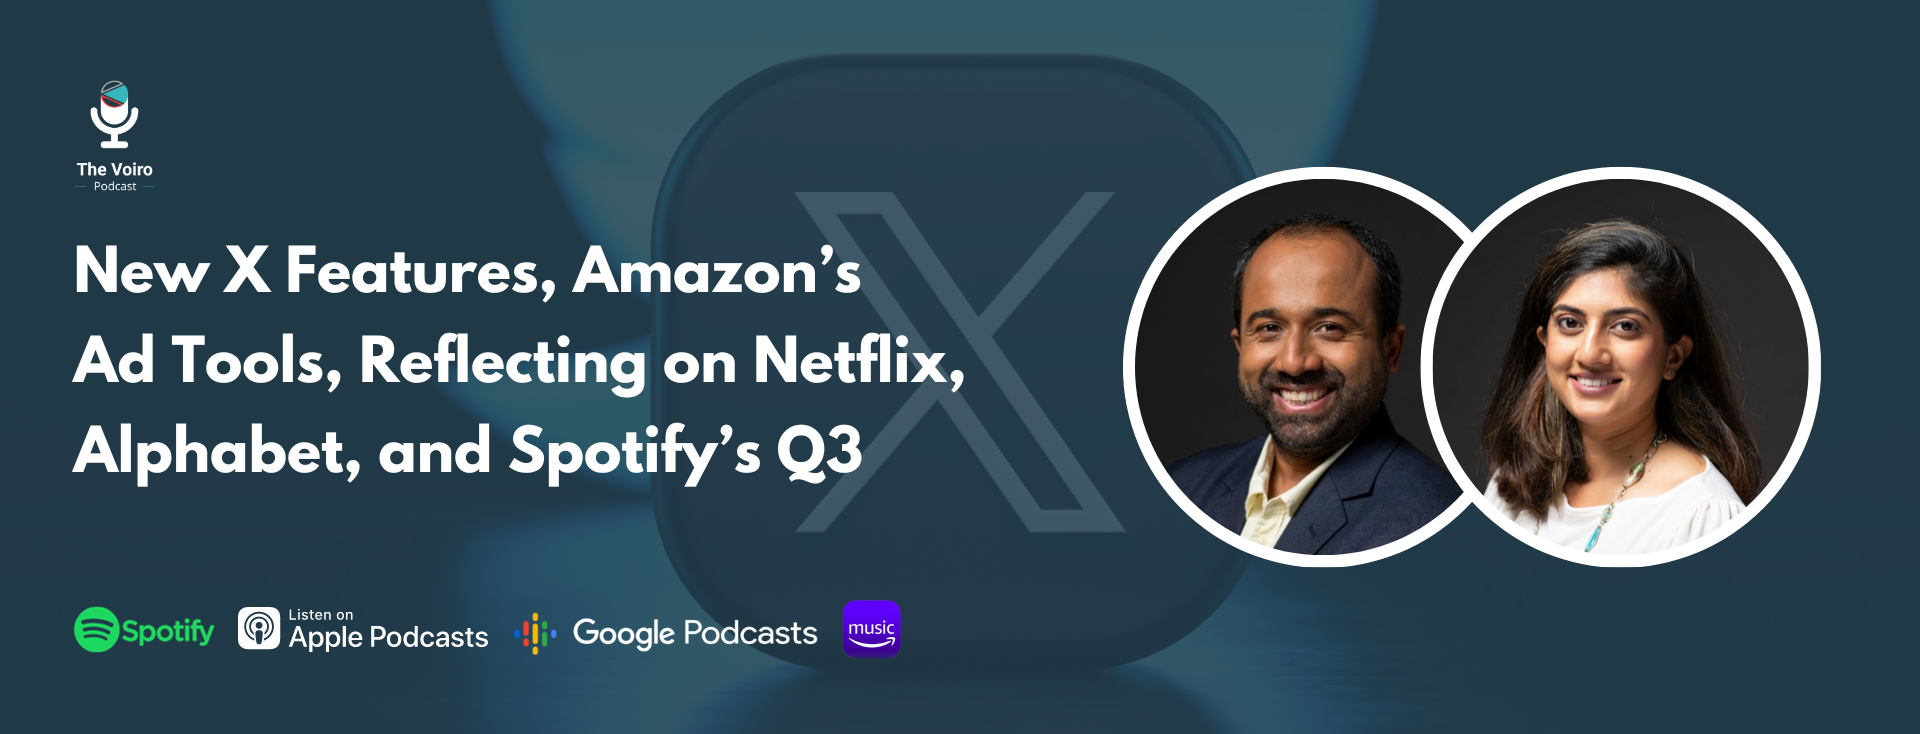 New X Features, Amazon’s Ad Tools, Reflecting on Netflix, Alphabet, and Spotify’s Q3